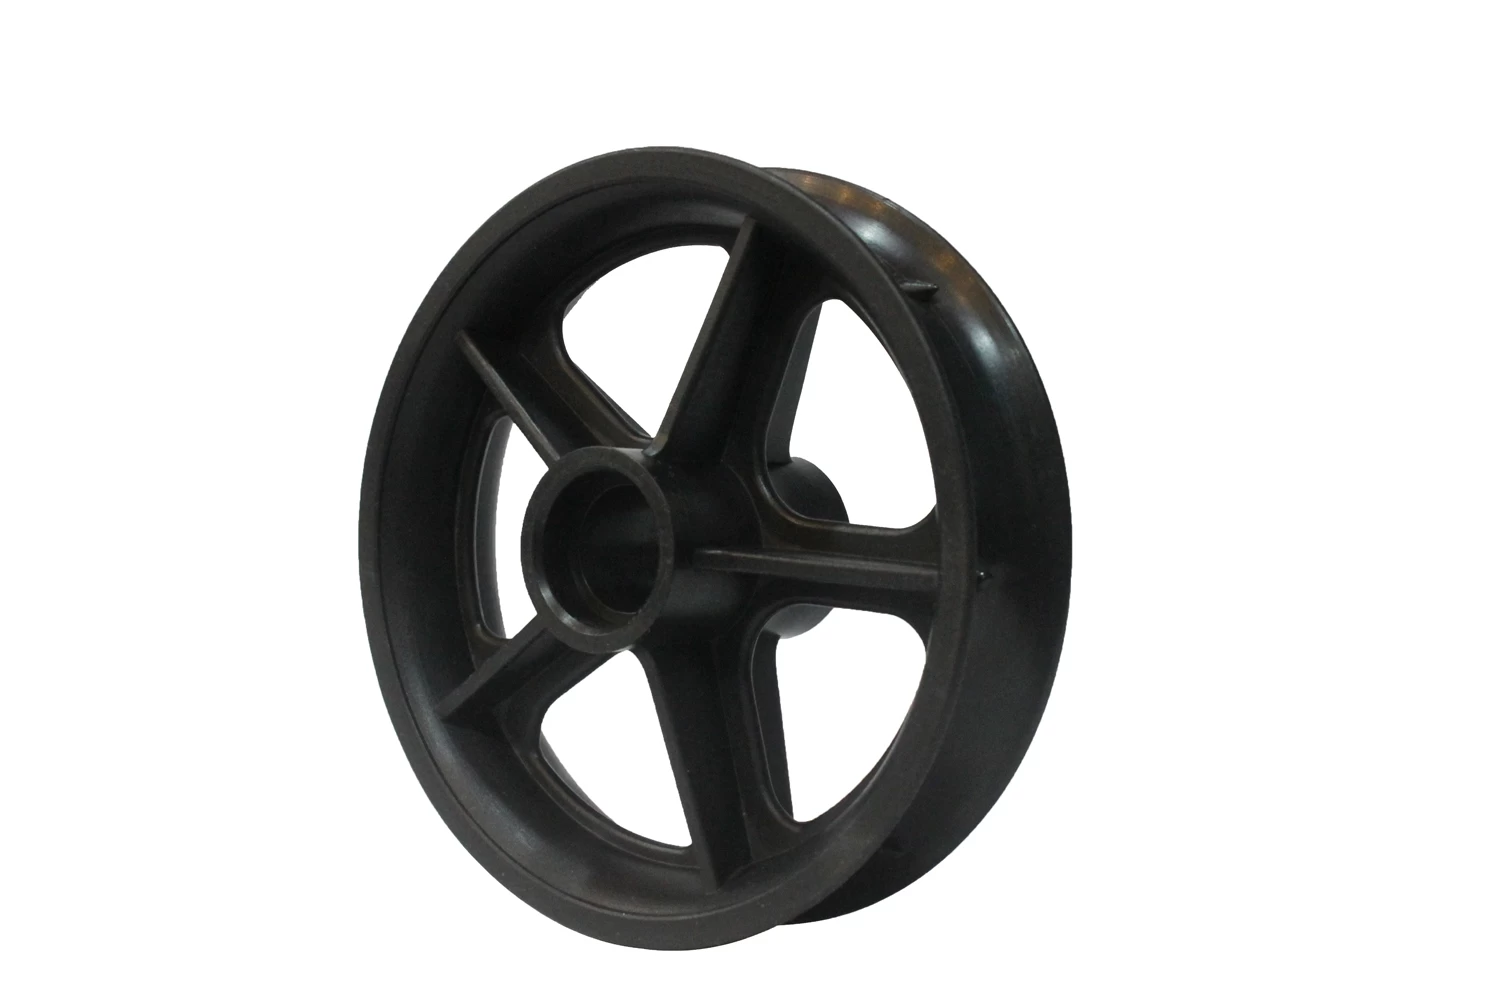 Chine whole flat free solid wheel,Solid Tires,pu foam tire,polyurethane tire fill fabricant